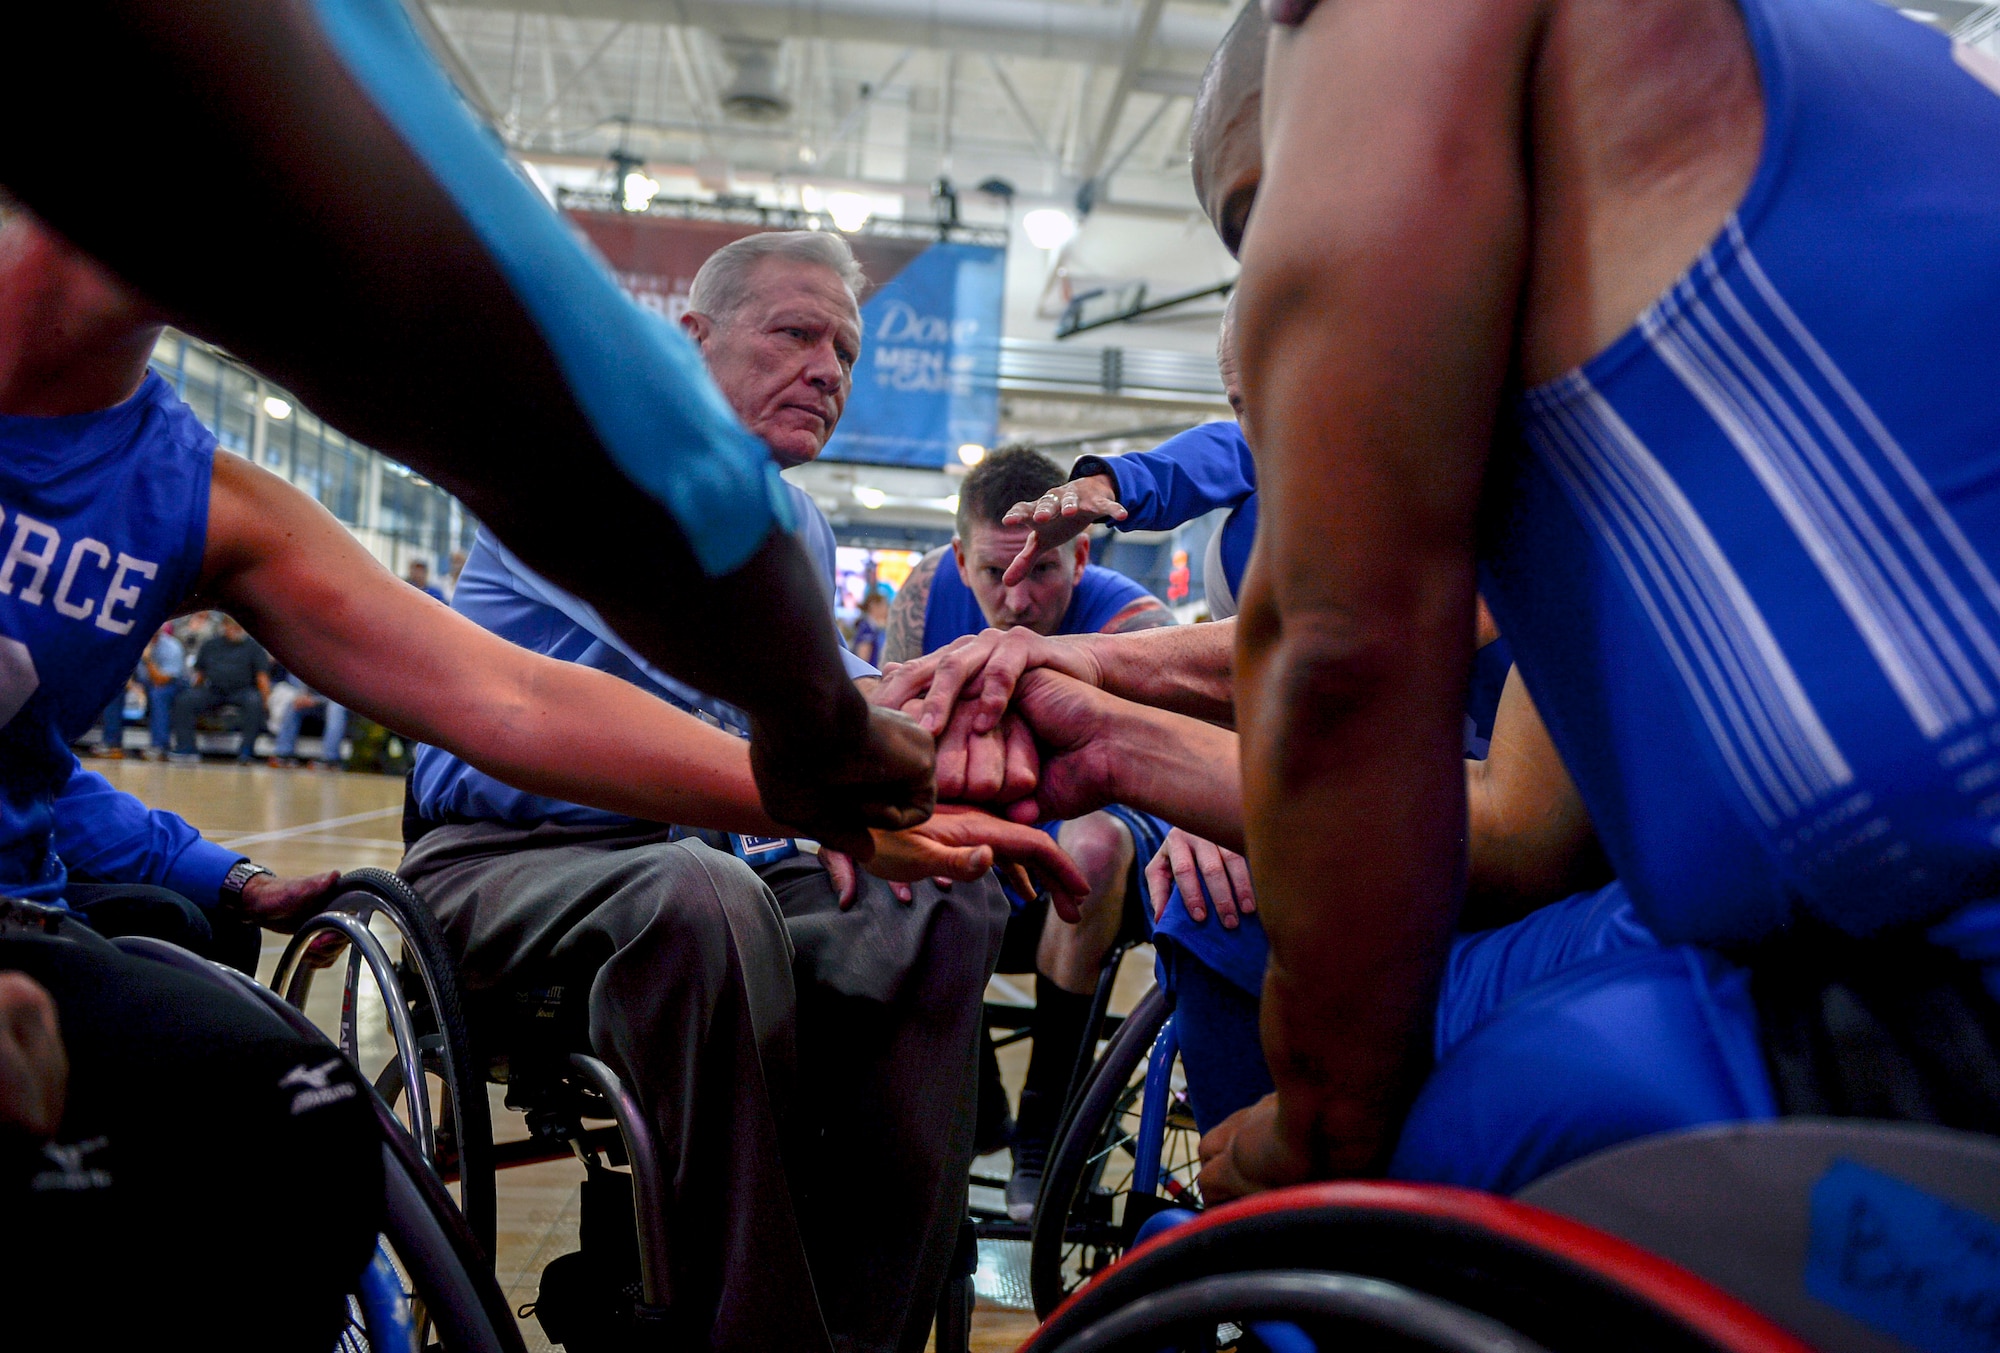 Team Air Force wheelchair basketball coach Mark Shepeherd gathers the team around before their game against Team Marine Corps during the Department of Defense Warrior Games at the U.S. Air Force Academy, Colorado Springs, Colo., June 3, 2018. Wheelchair basketball was developed by World War II U.S. veterans in 1945, and the sport was introduced on the global stage at the Rome 1960 Paralympic Games. Wheelchair basketball retains most major rules and scoring of basketball, but some rules have been modified with consideration for the wheelchair. (U.S. Air Force photo by Tech Sgt. Anthony Nelson Jr.)